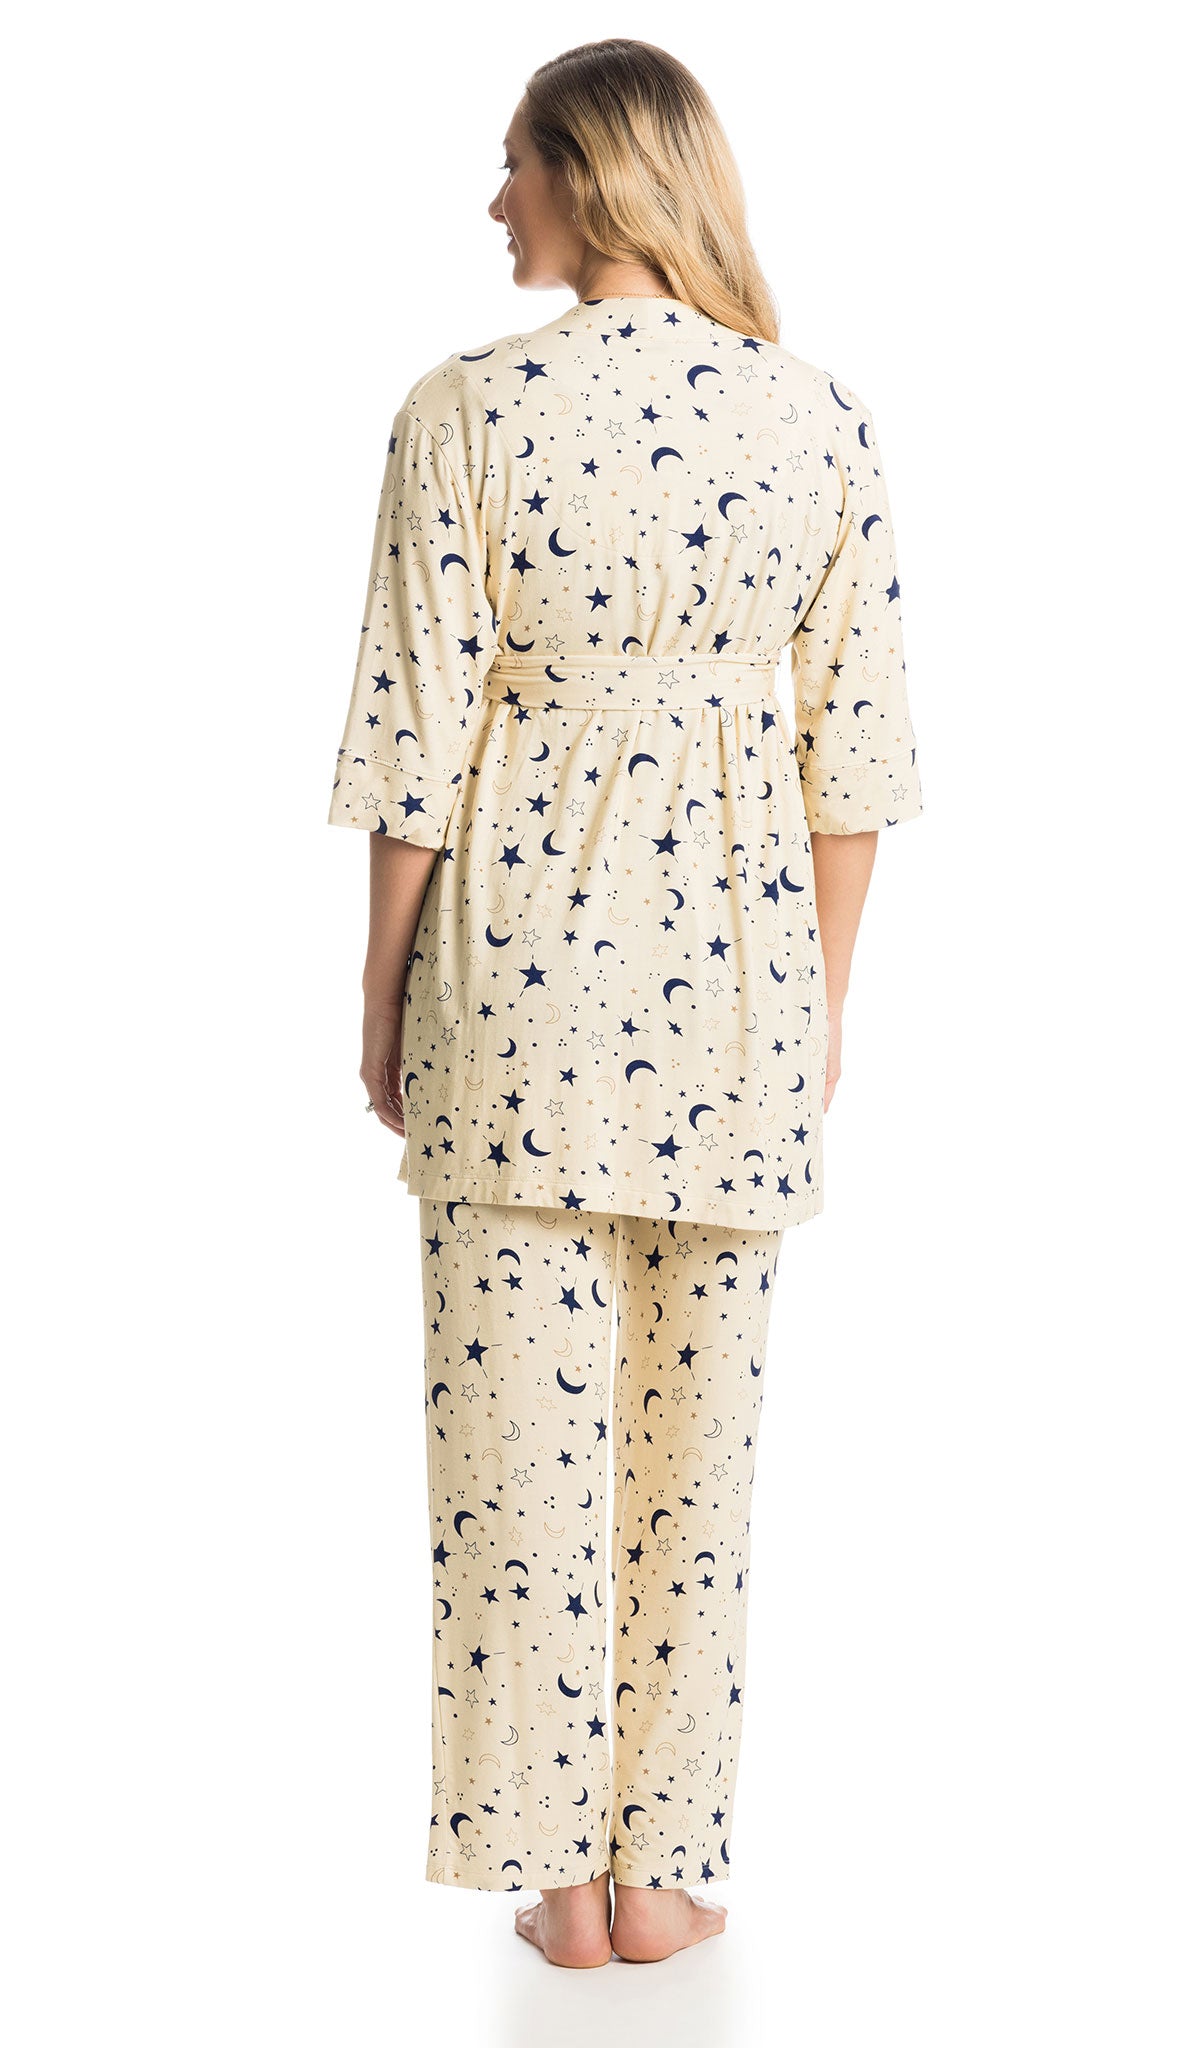 Twinkle Analise 5-Piece Set, back shot of woman wearing robe and pant.